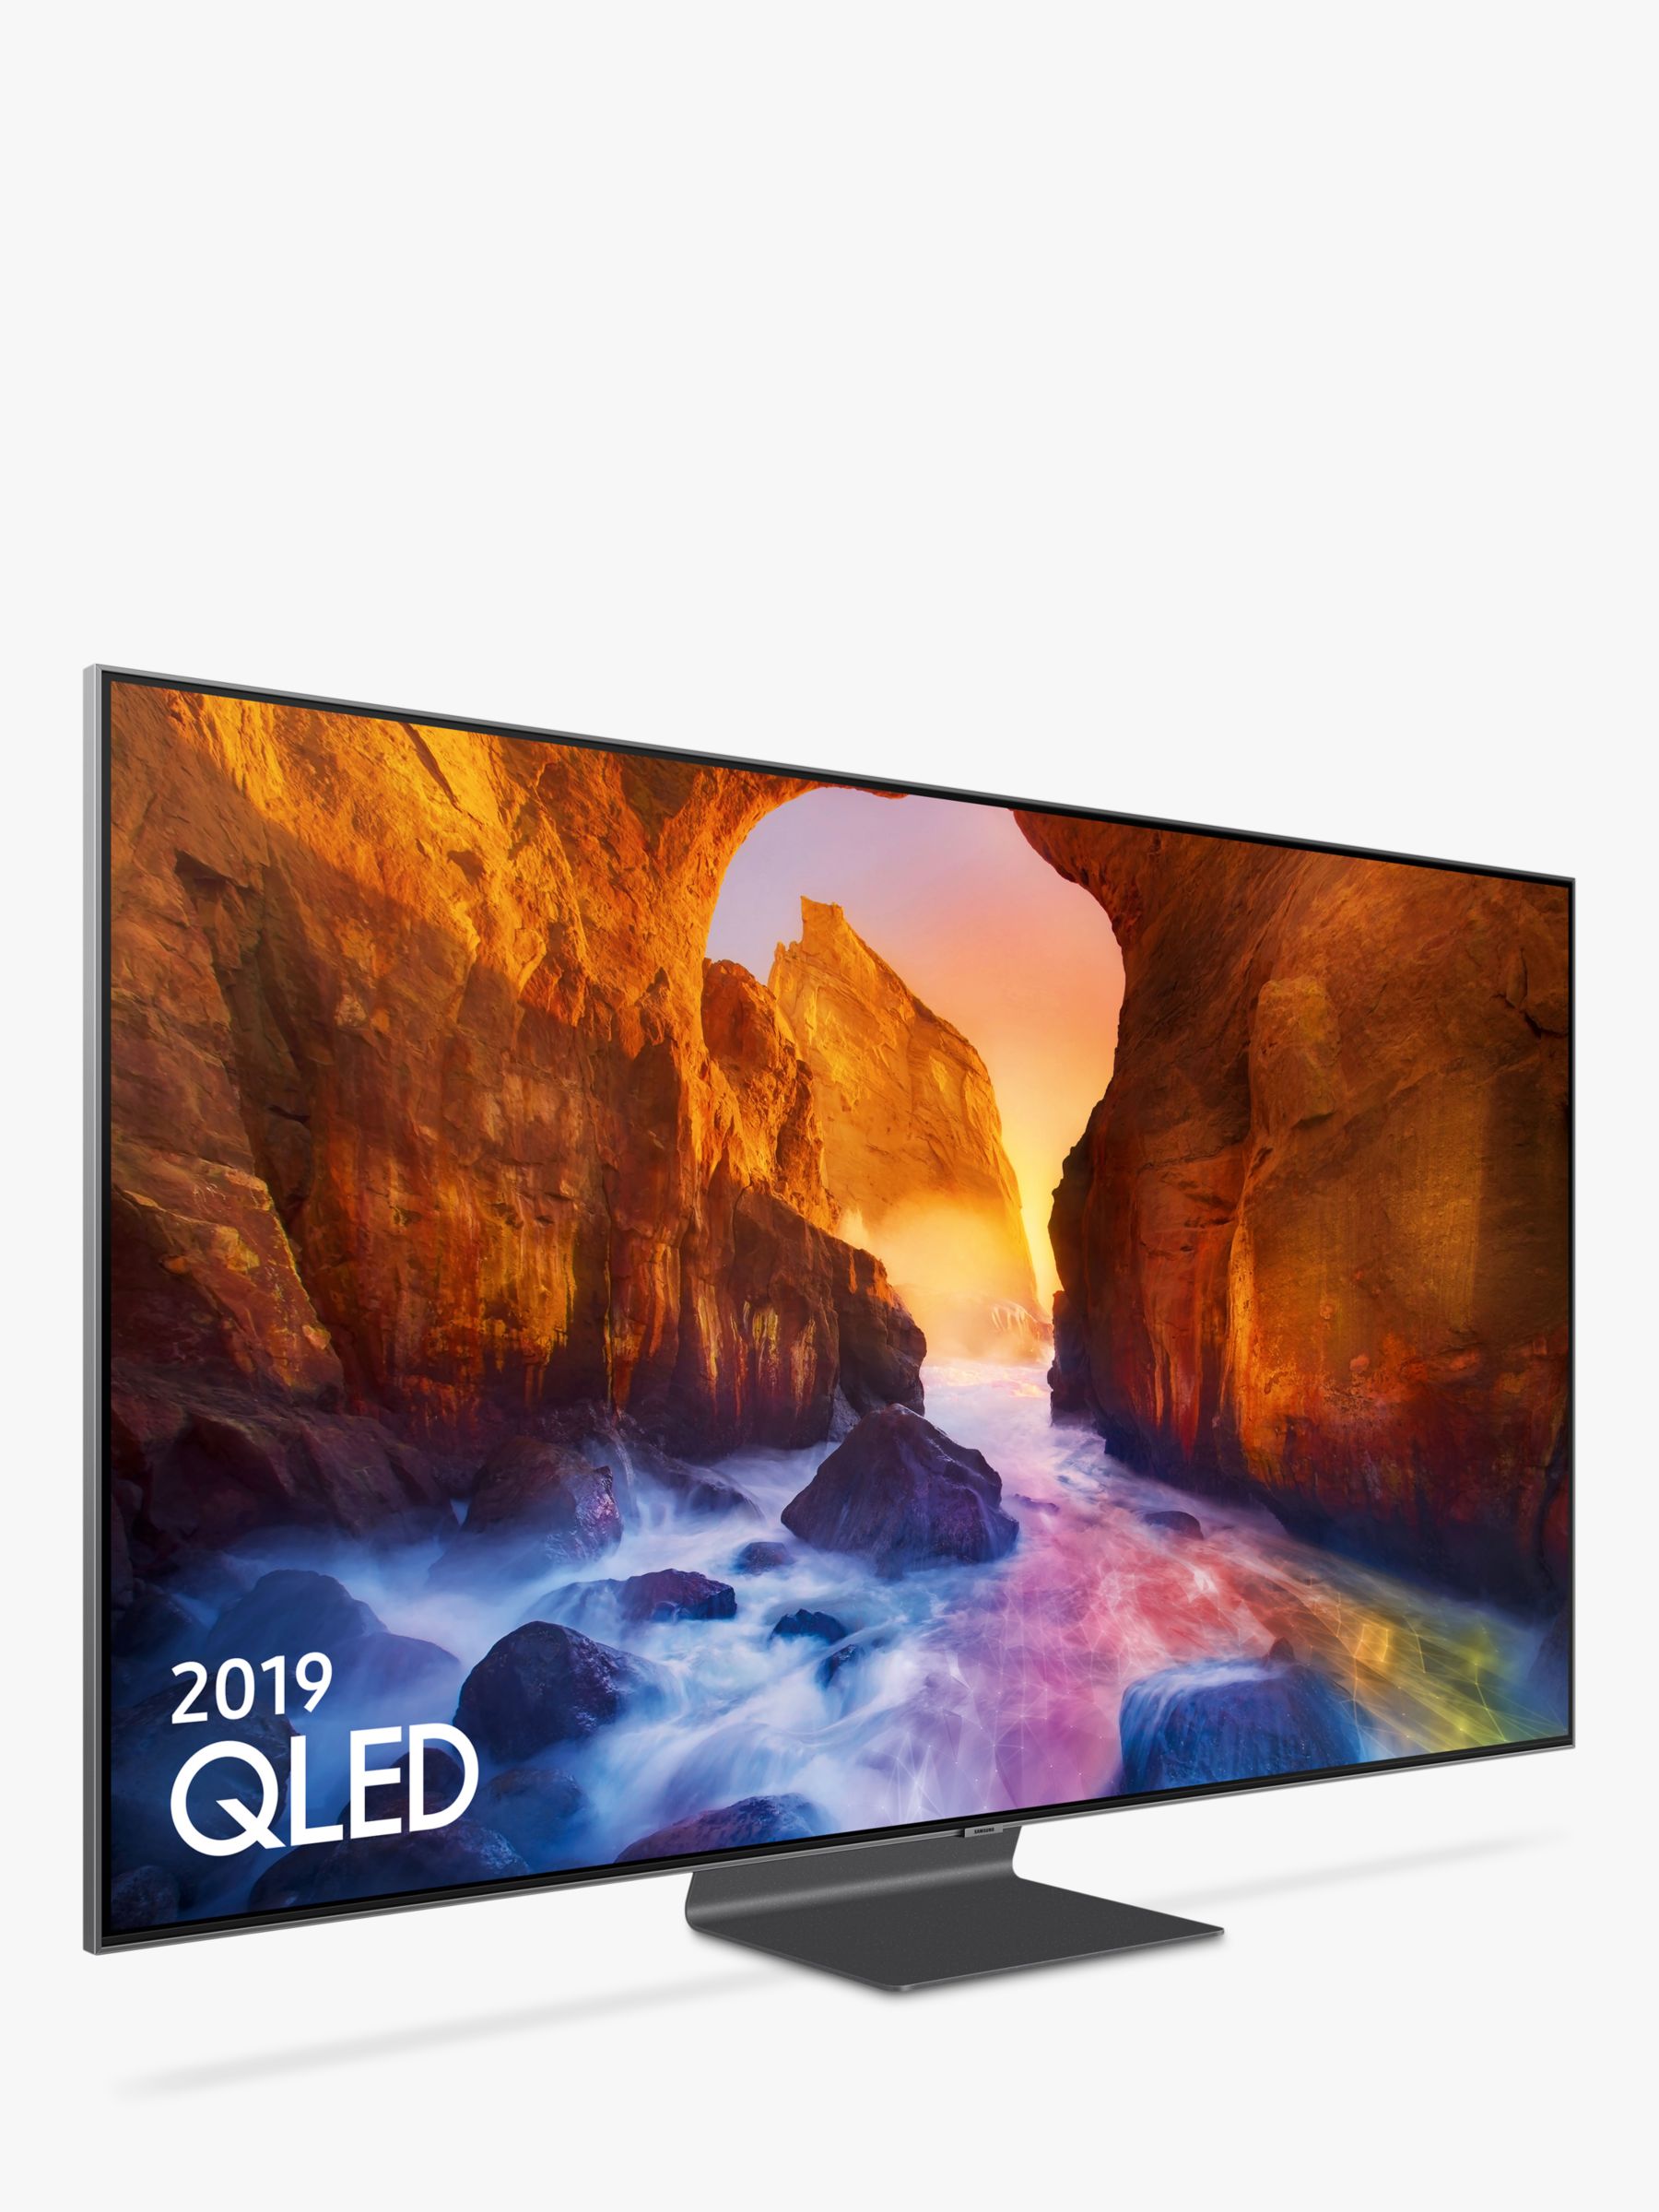 Save £500 with this Samsung QLED 55-inch 4K TV Black Friday deal